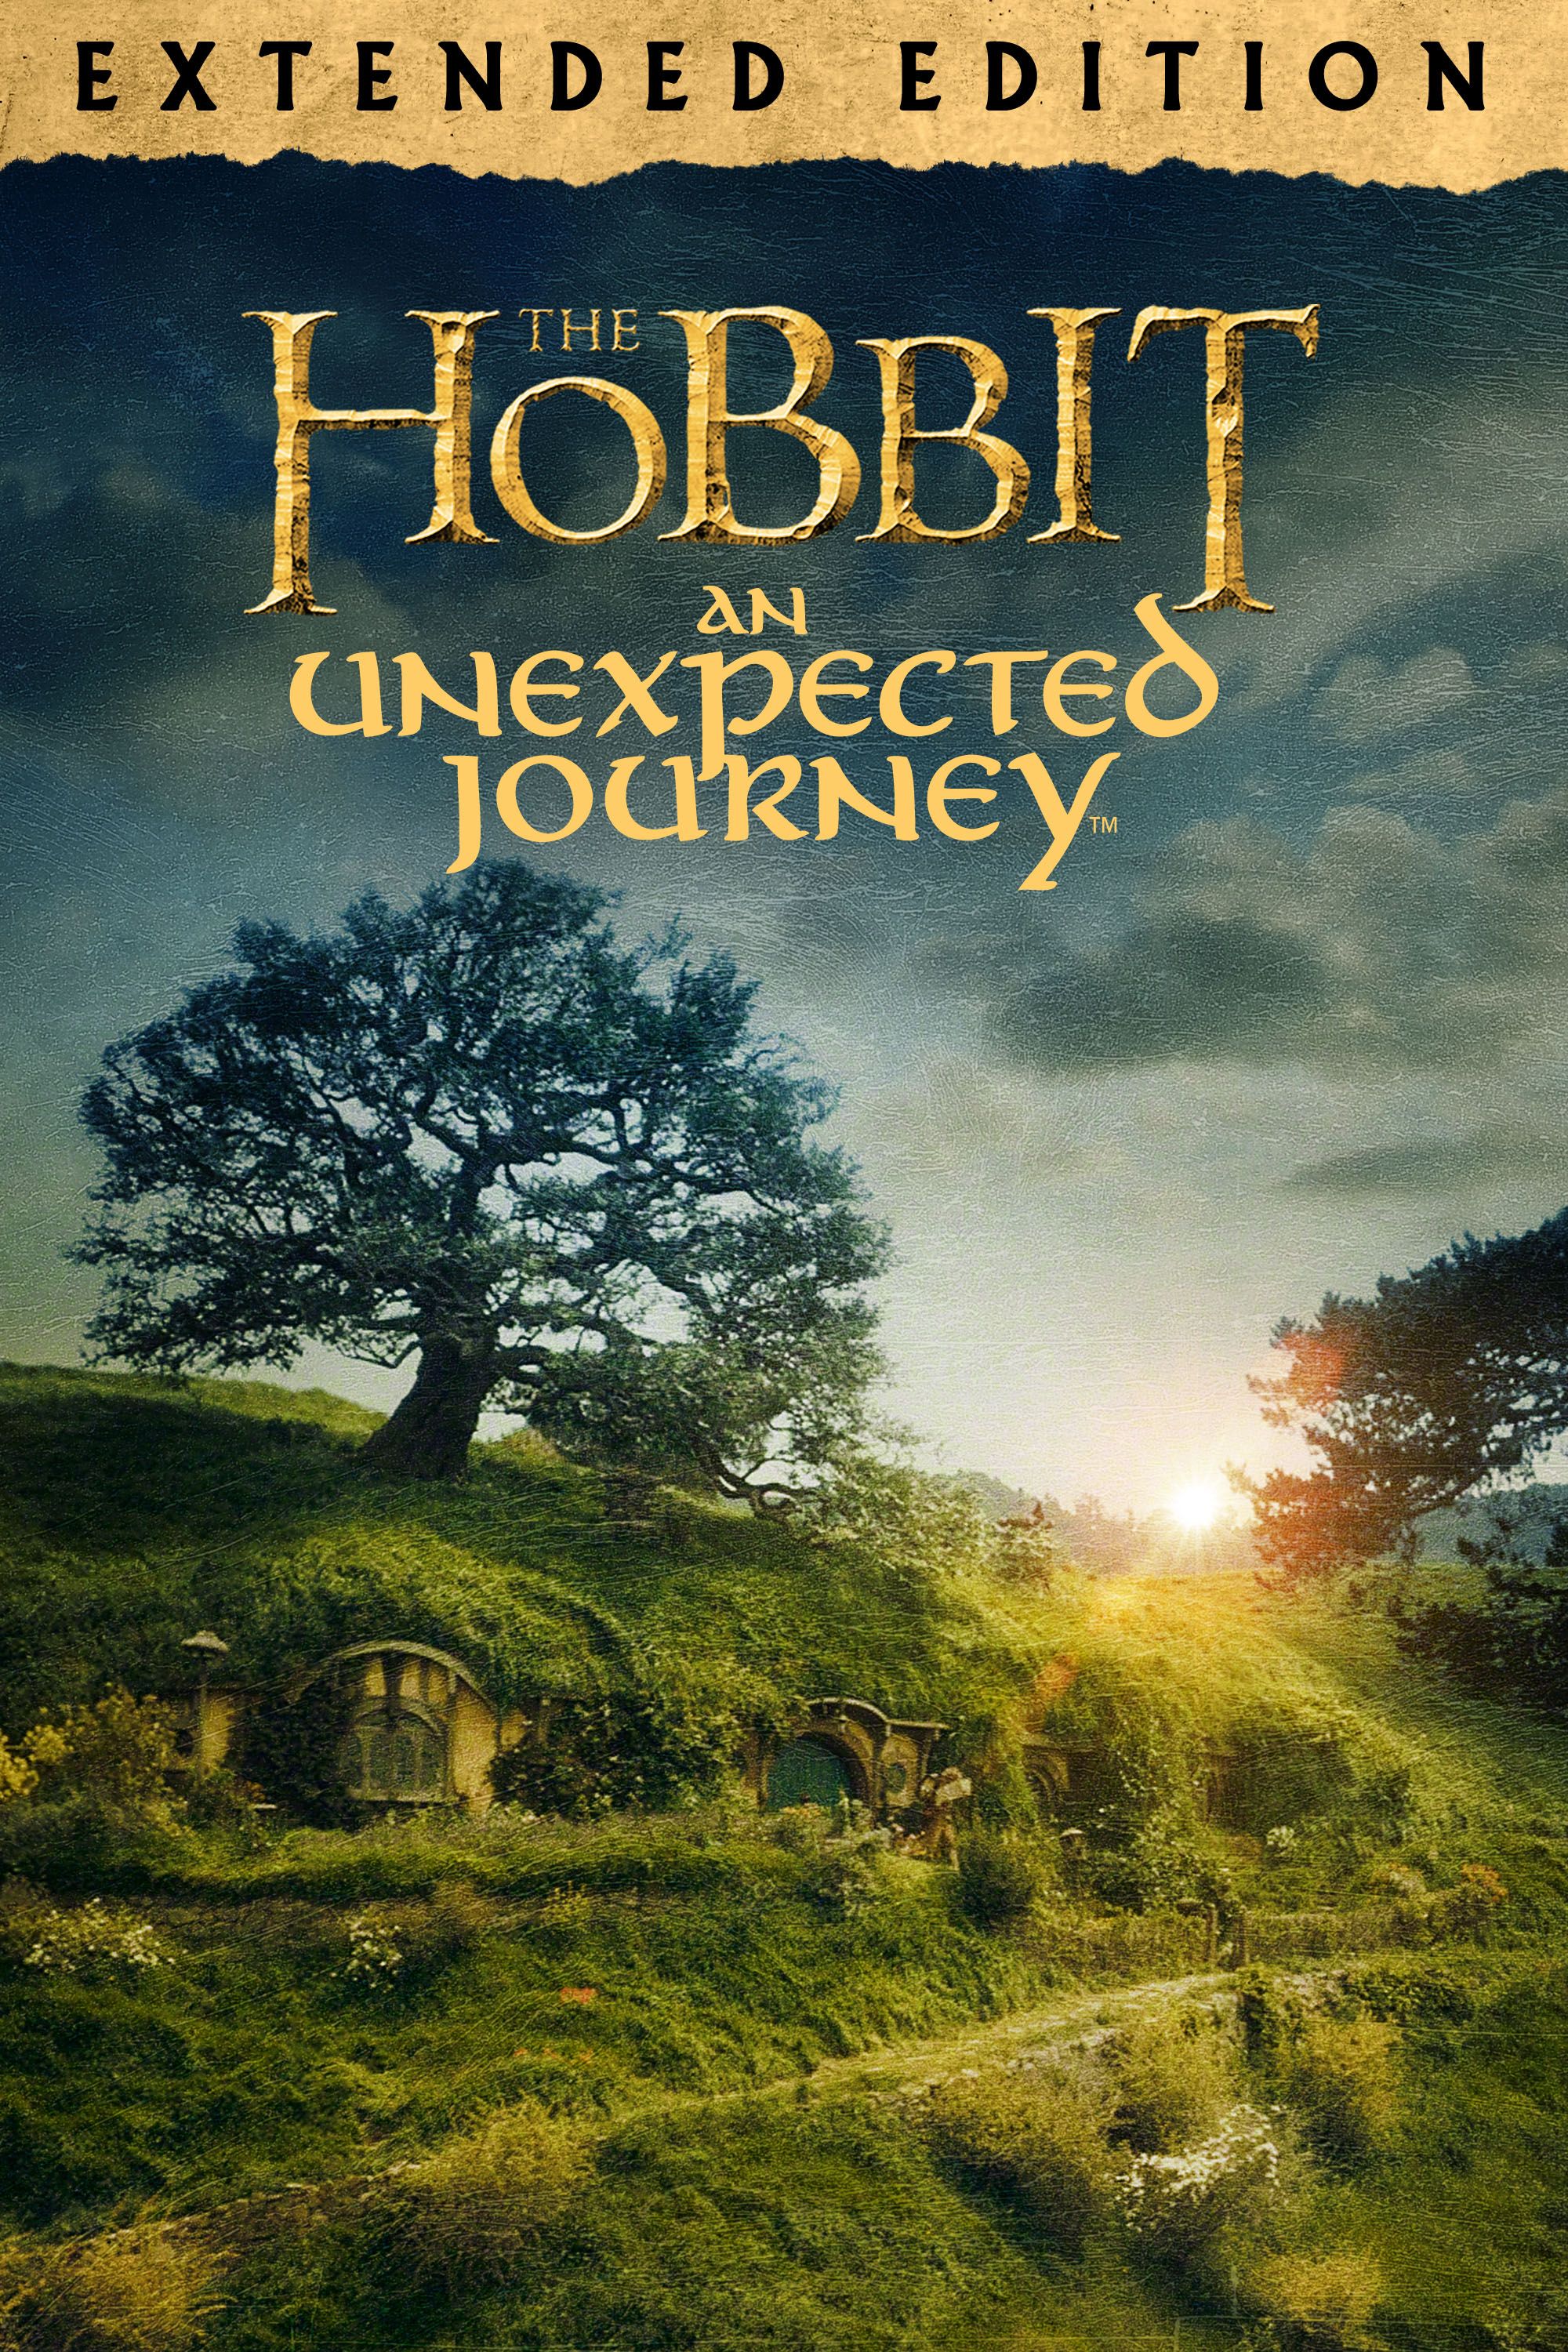 The Hobbit: An Unexpected Journey (extended edition) - Tolkien Gateway